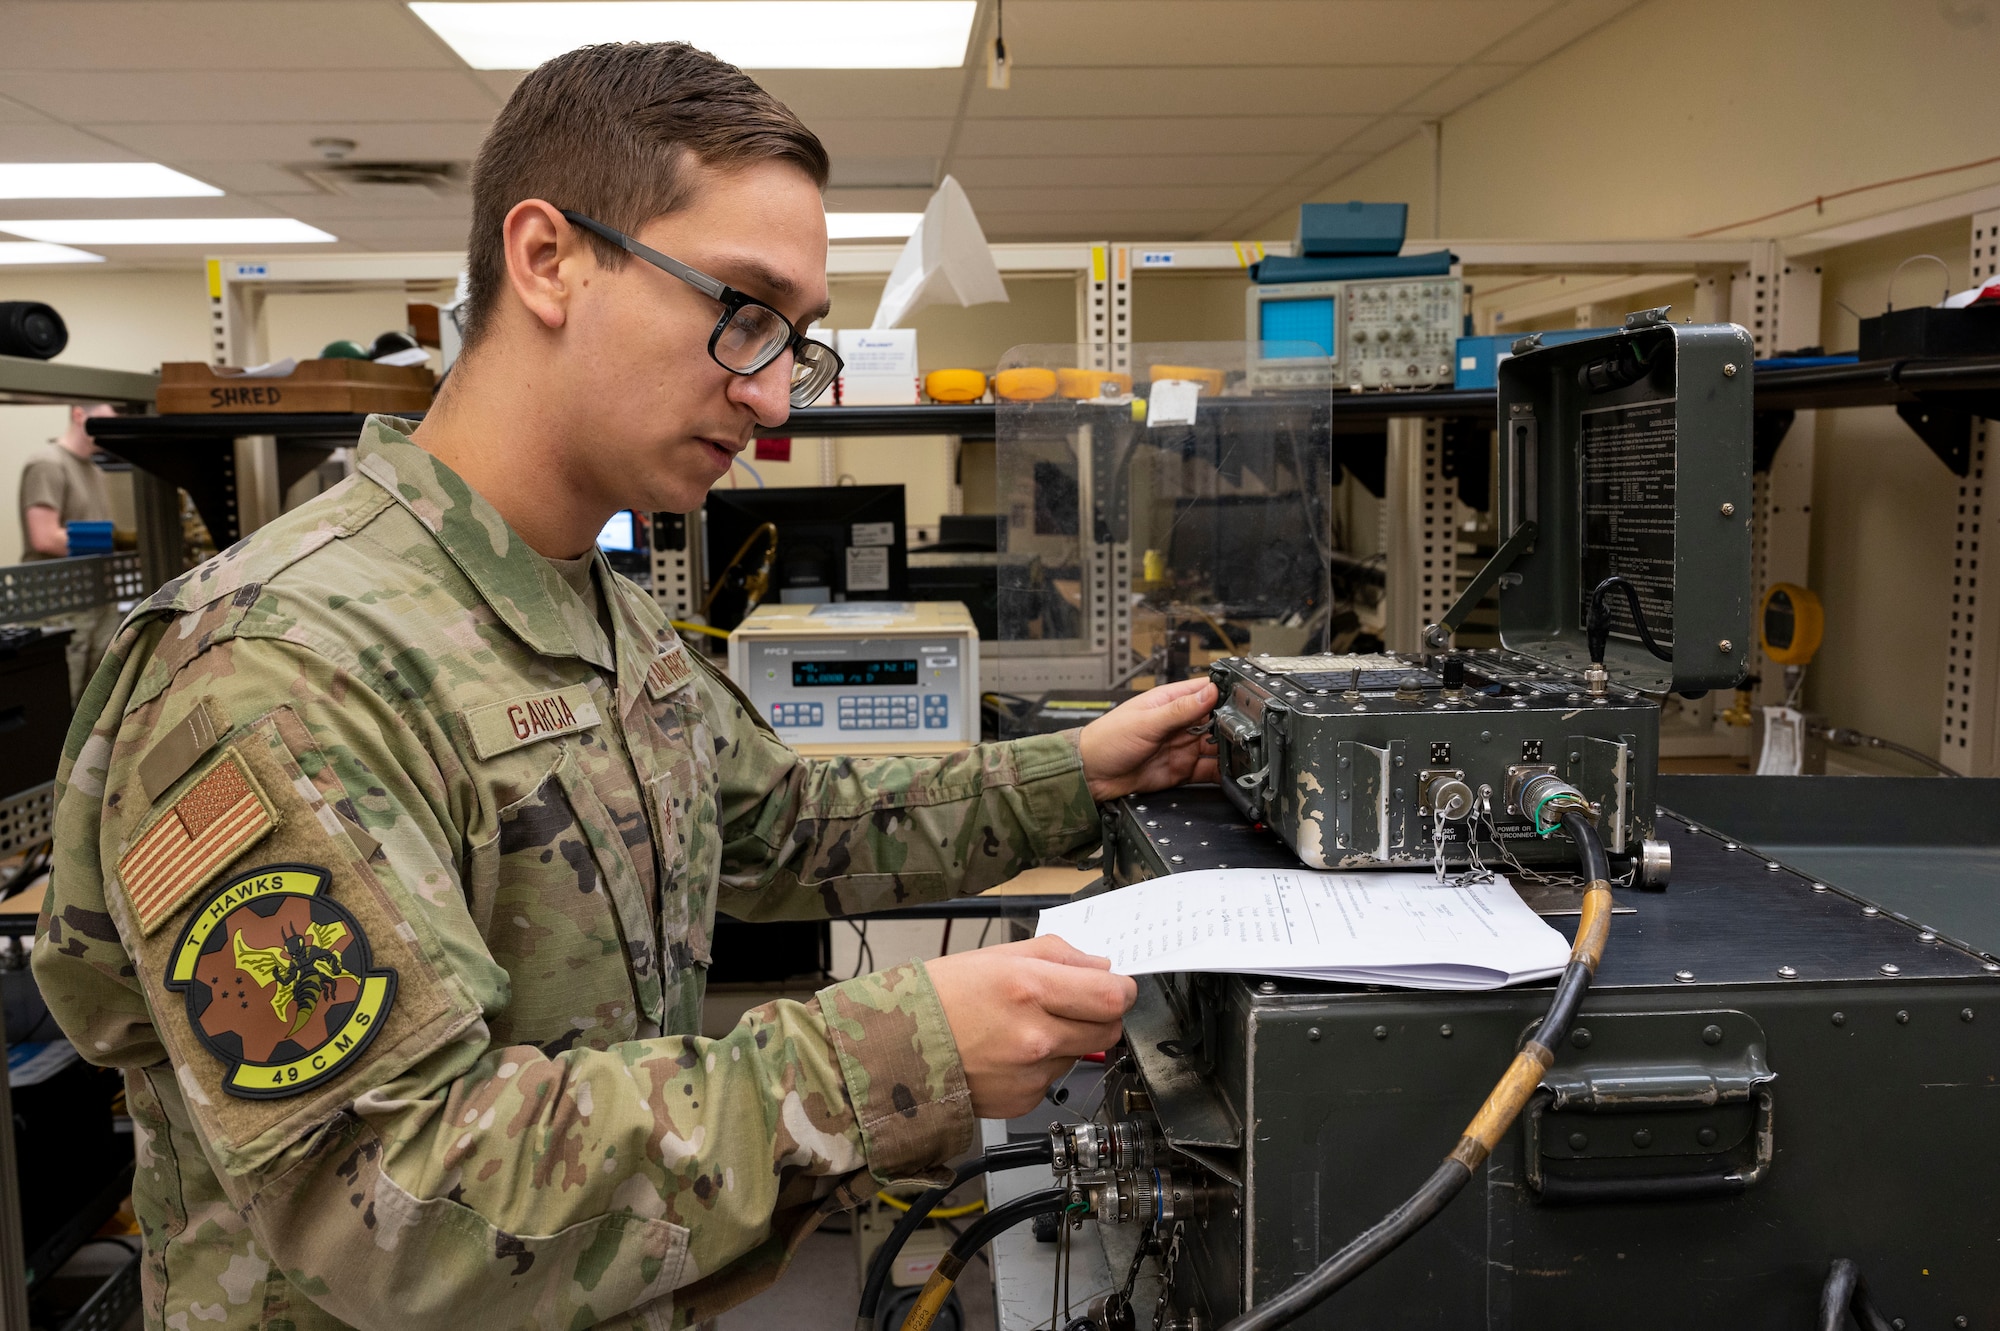 U.S. Air Force Staff Sgt. Tony Garcia, 49th Component Maintenance Squadron physical dimensional supervisor, uses a pressure test set at Holloman Air Force Base, New Mexico, Jan. 6, 2023.